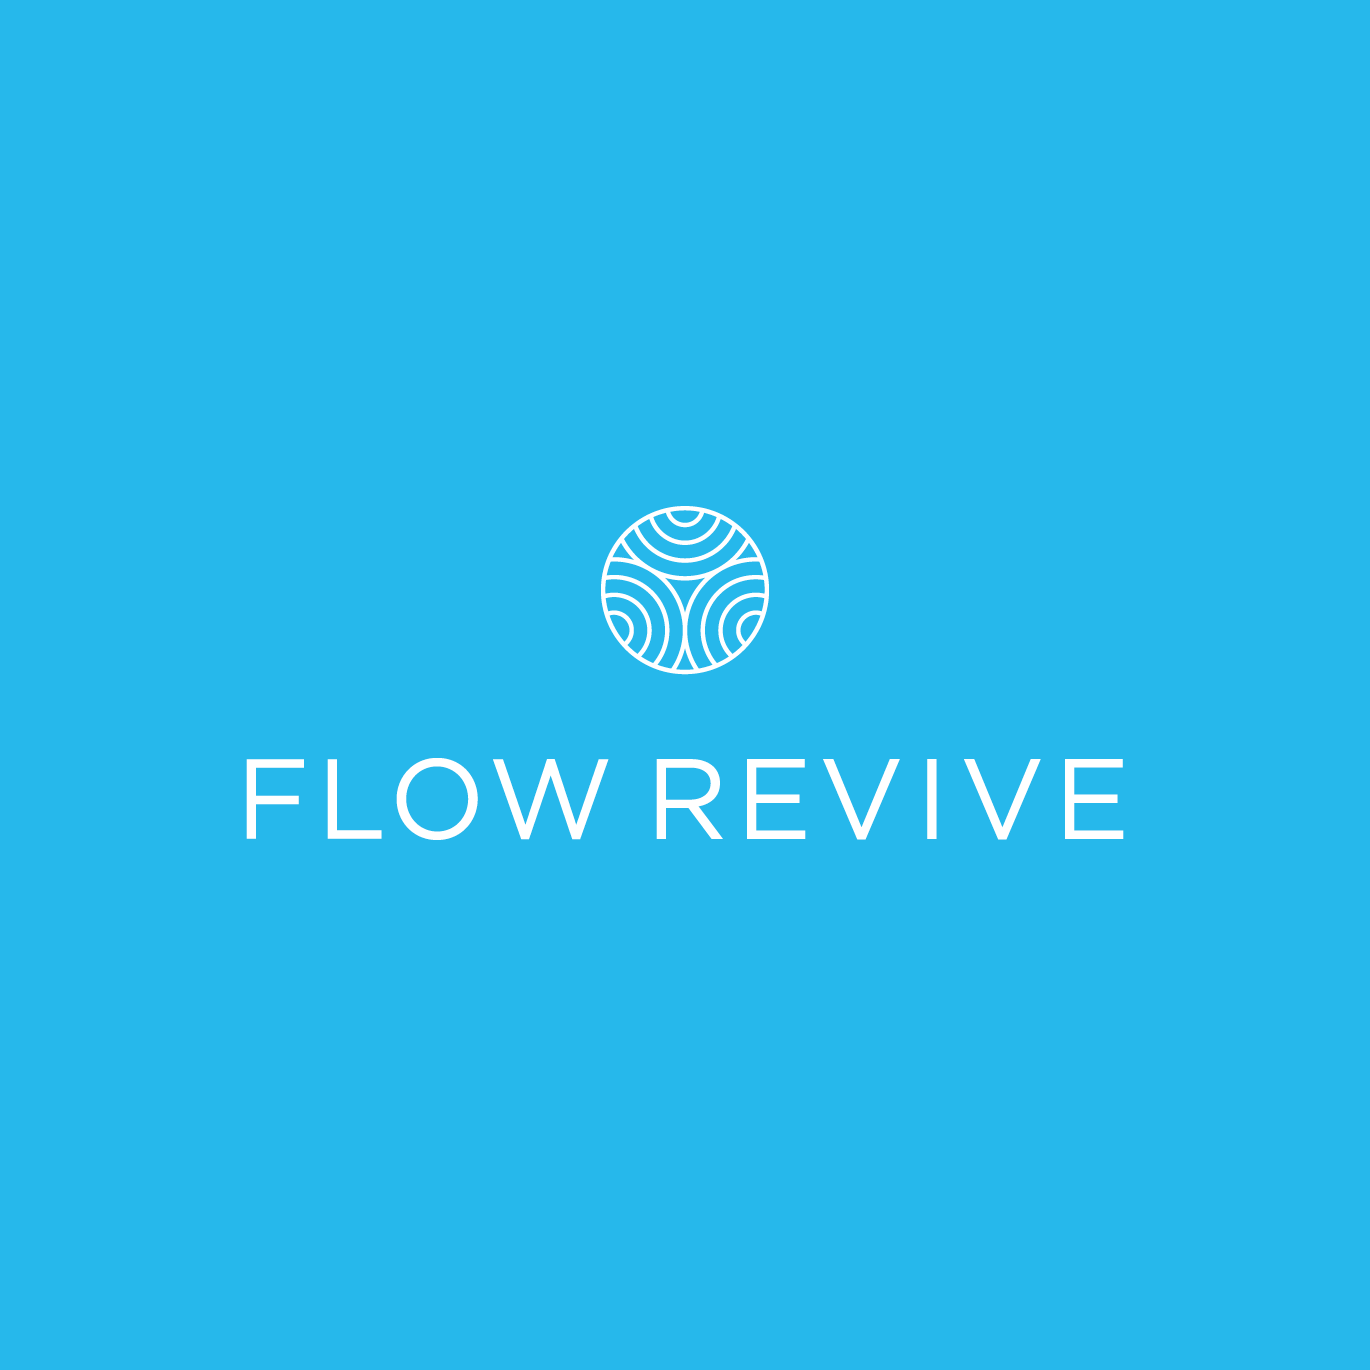 Flow Revive logo by Squeeze Creative